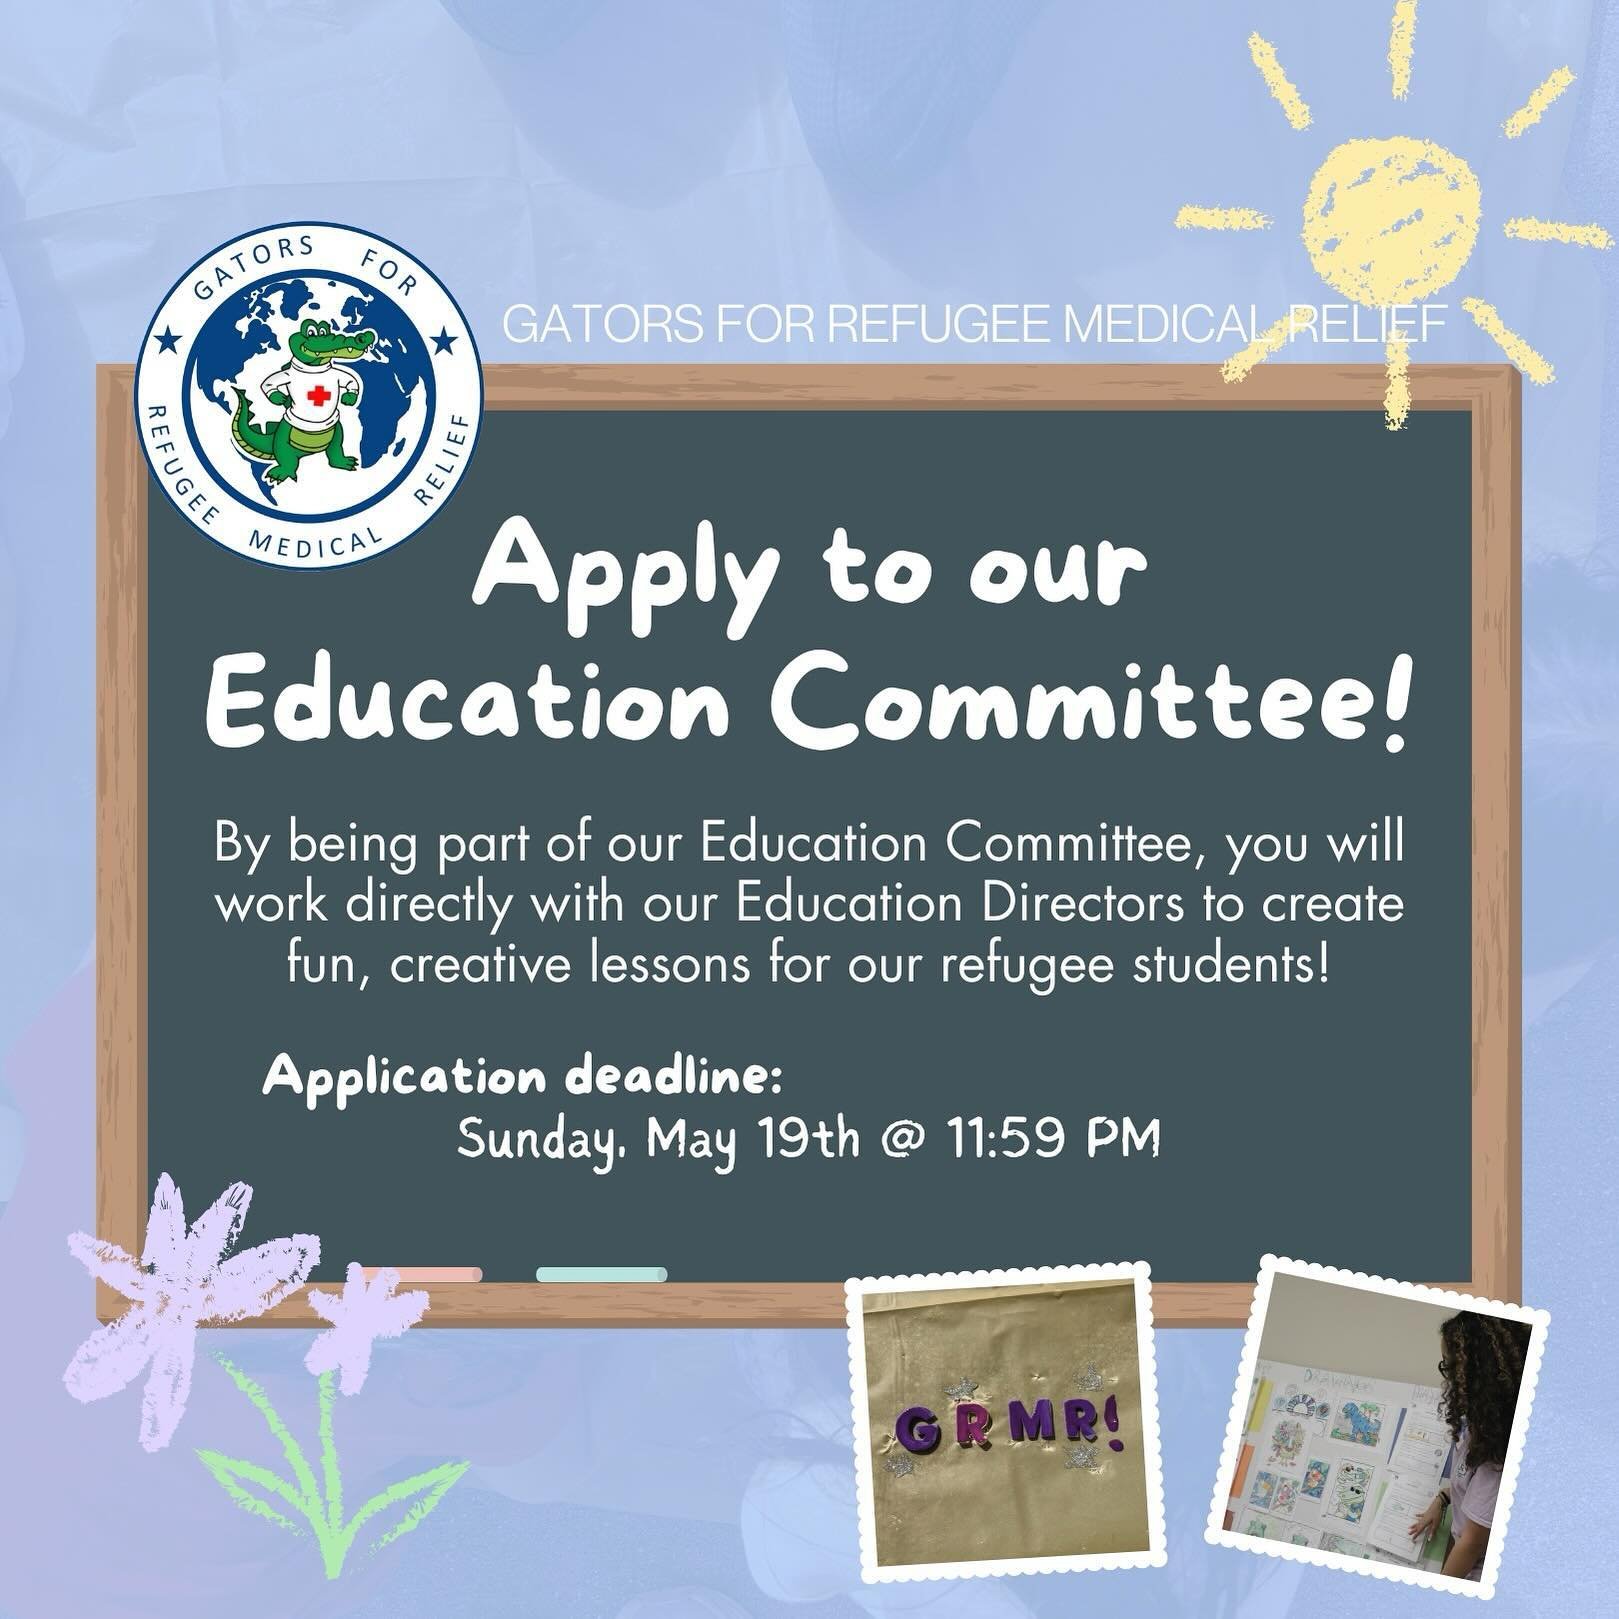 Hey GRMR! We hope you all are having a great start to your summer ☀️

Our Directors of Education, Krishna and Najli, are looking for students to join the Education Committee. As a member of the committee, students will work to create fun and engaging